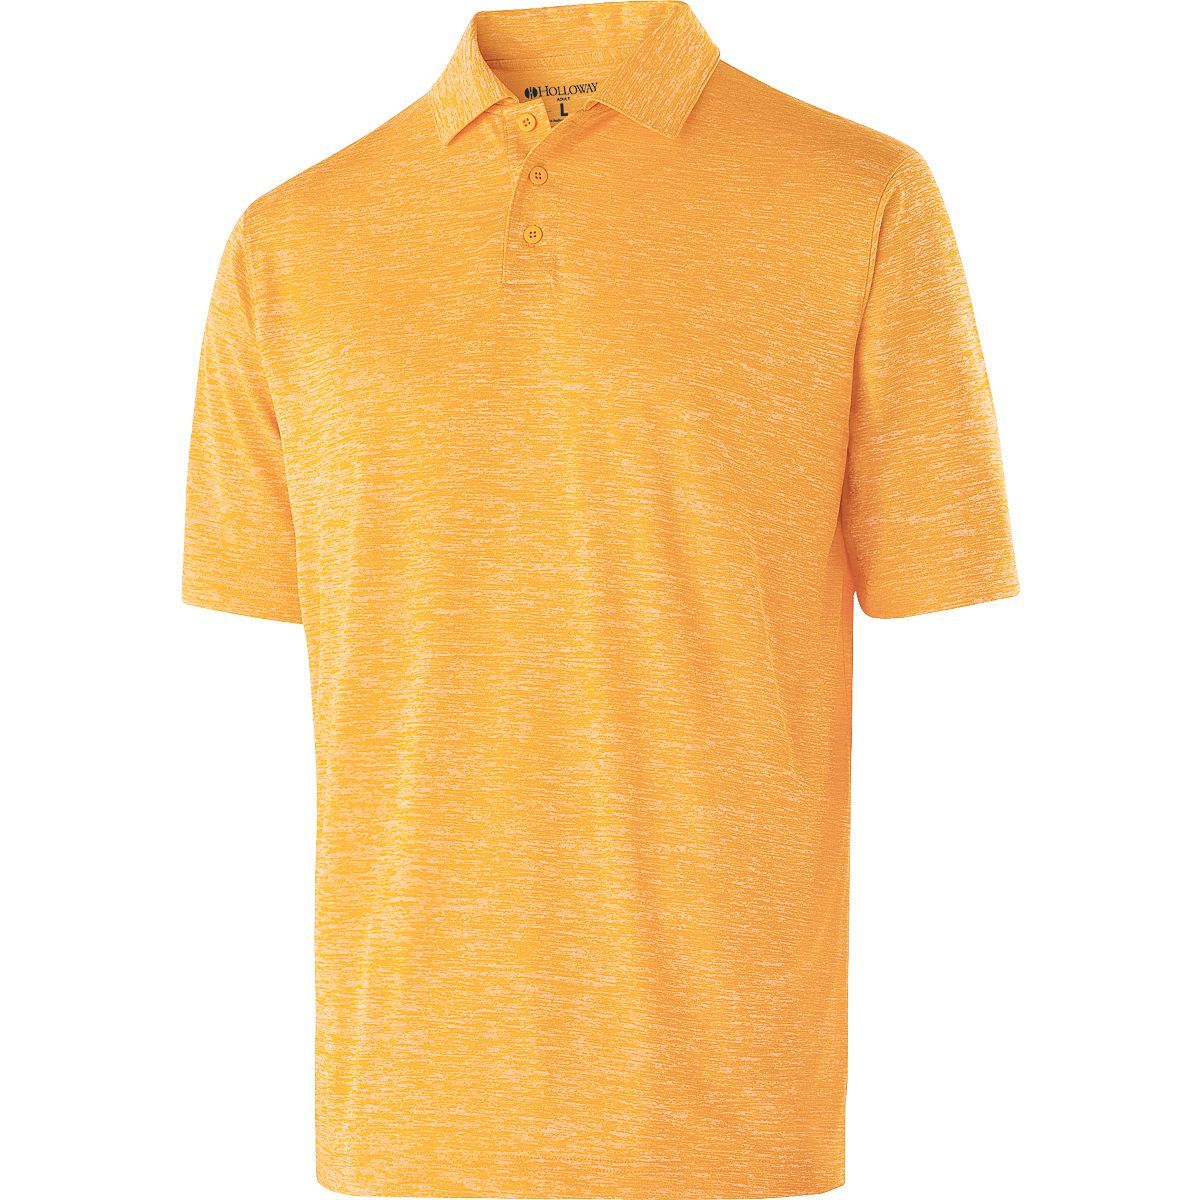 Holloway Electrify 2.0 Polo in Light Gold Heather  -Part of the Adult, Adult-Polos, Polos, Holloway, Shirts product lines at KanaleyCreations.com